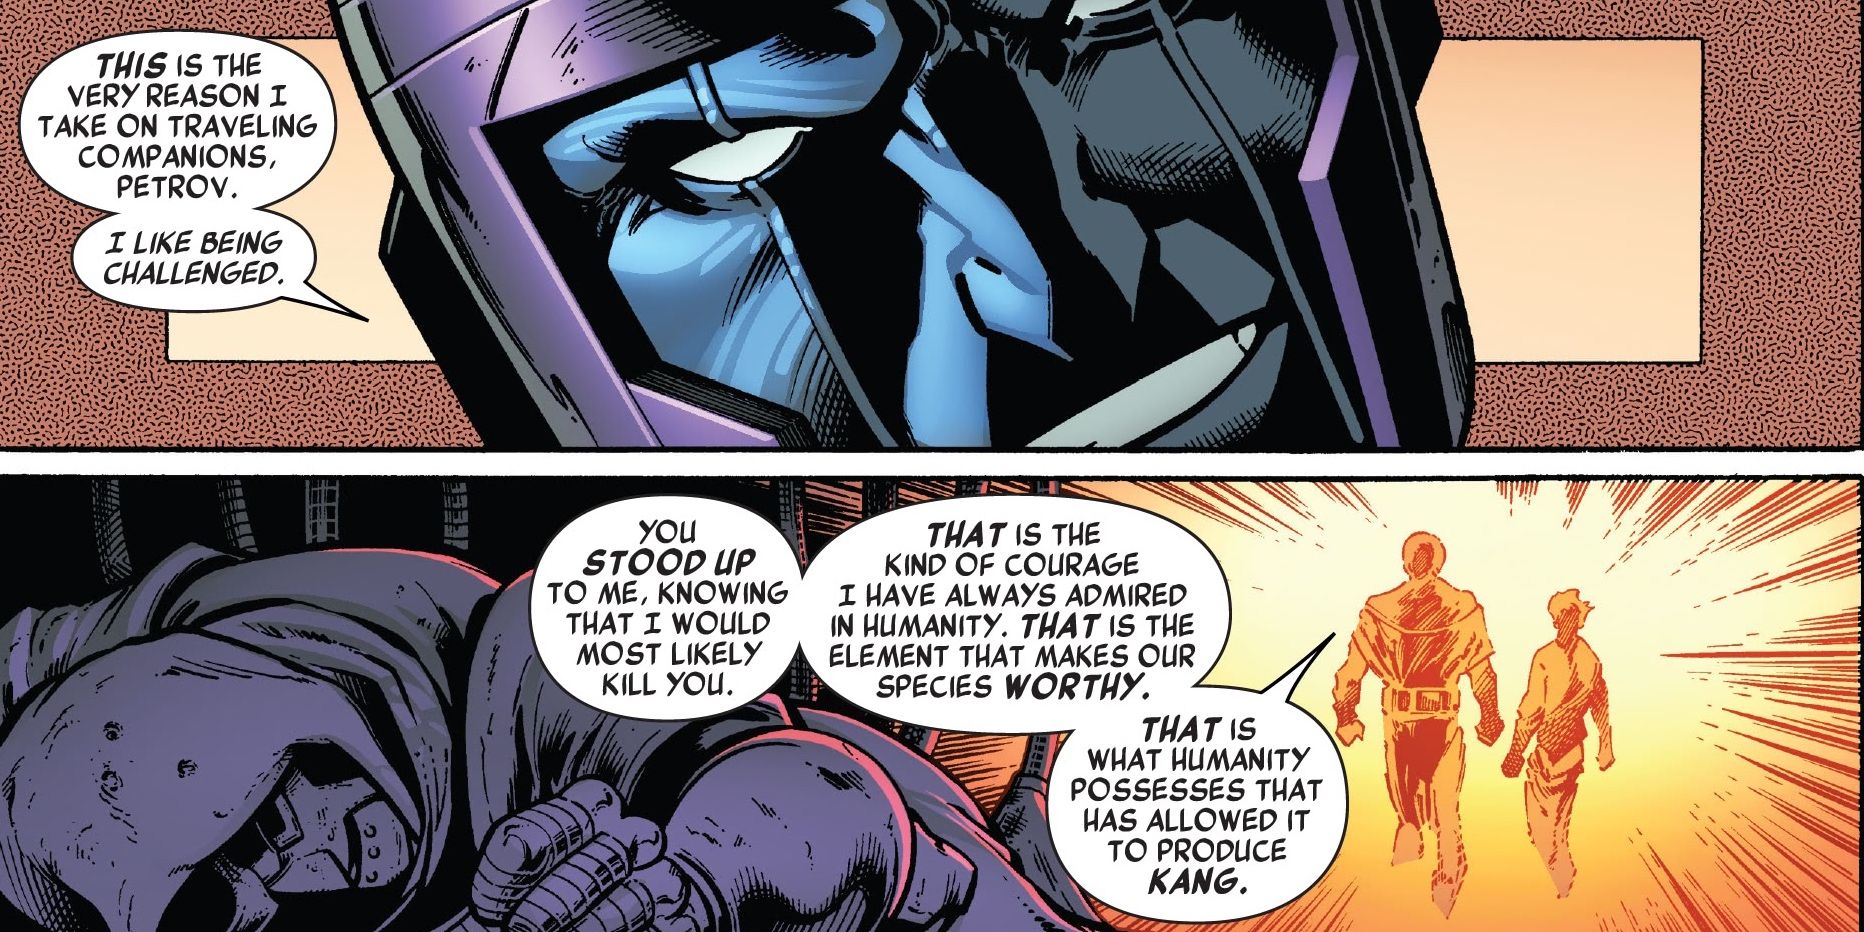 Kang Ripping Off Doctor Who Proves He Could Still Become a Hero